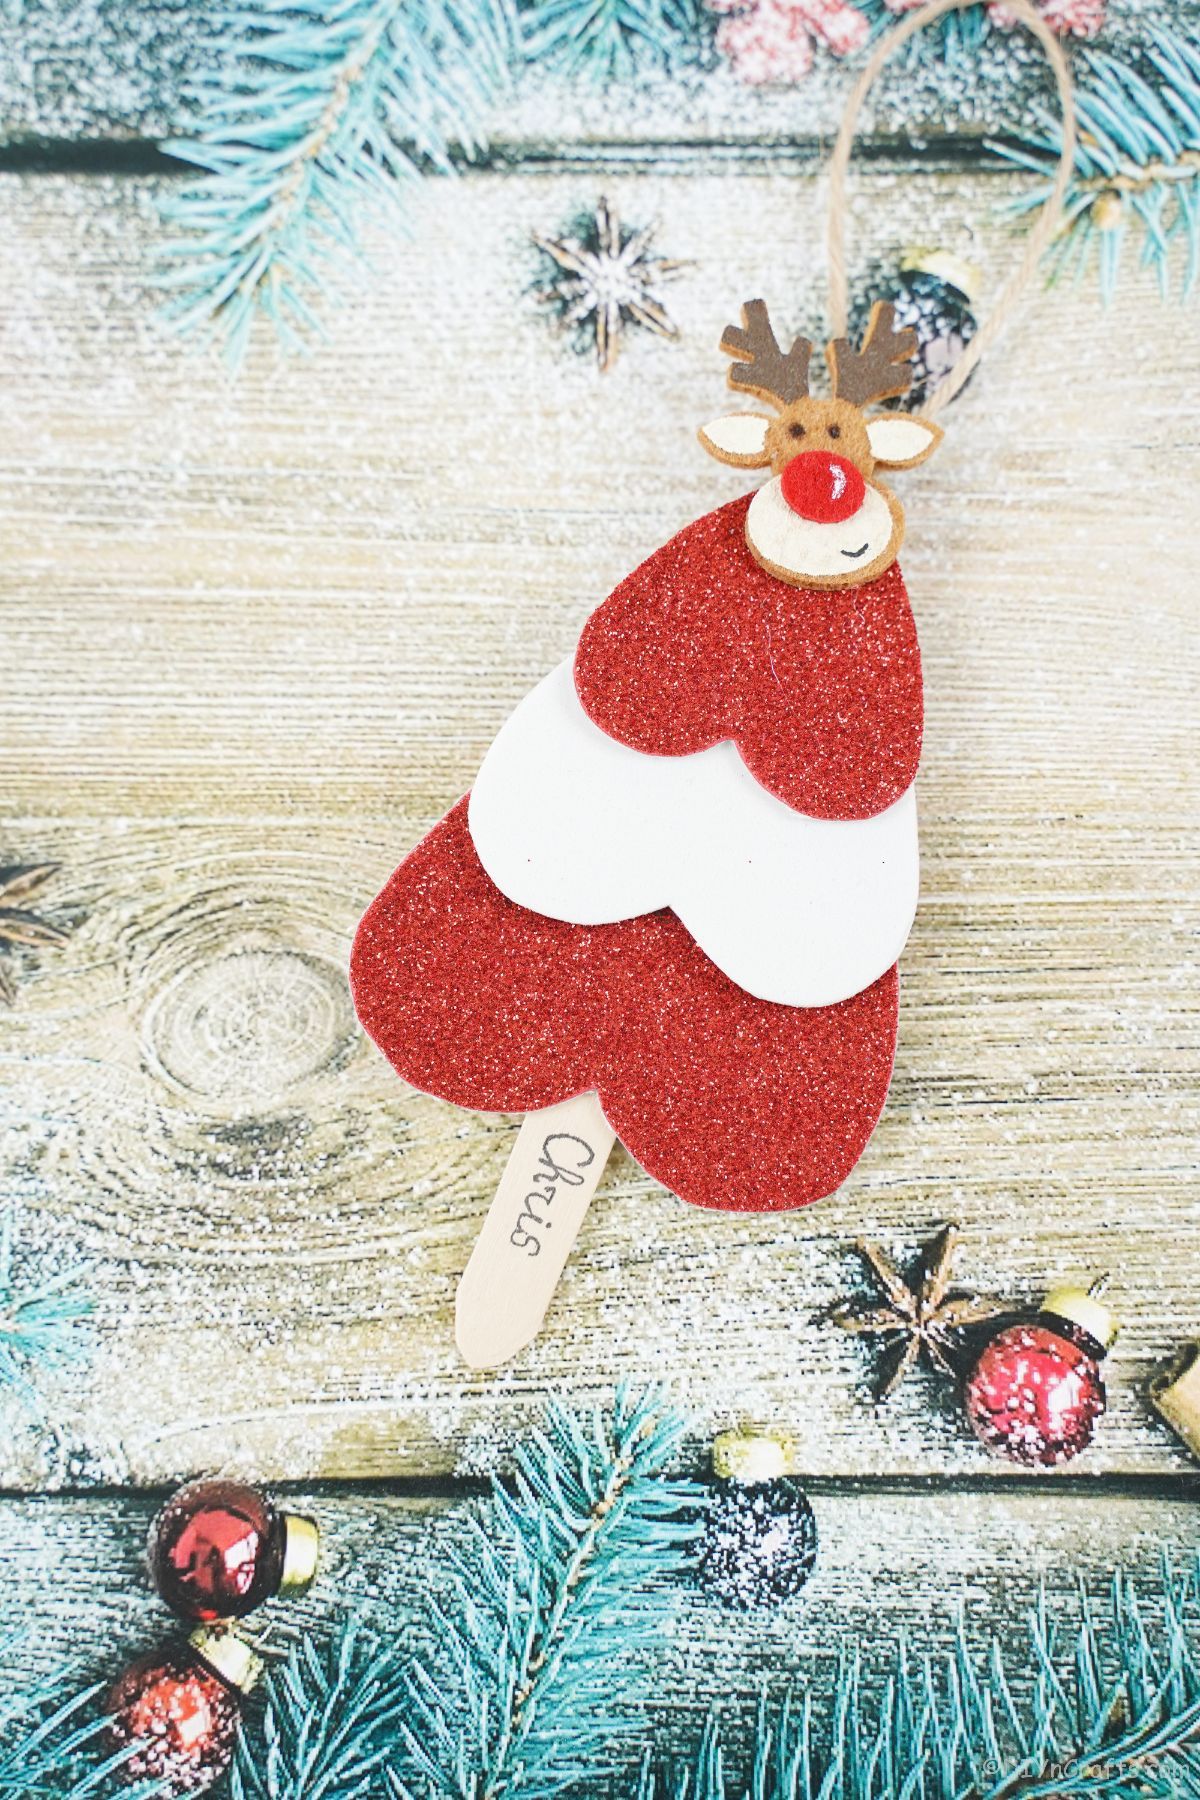 paper candy cane striped mini tree ornament placed on holiday themed paper